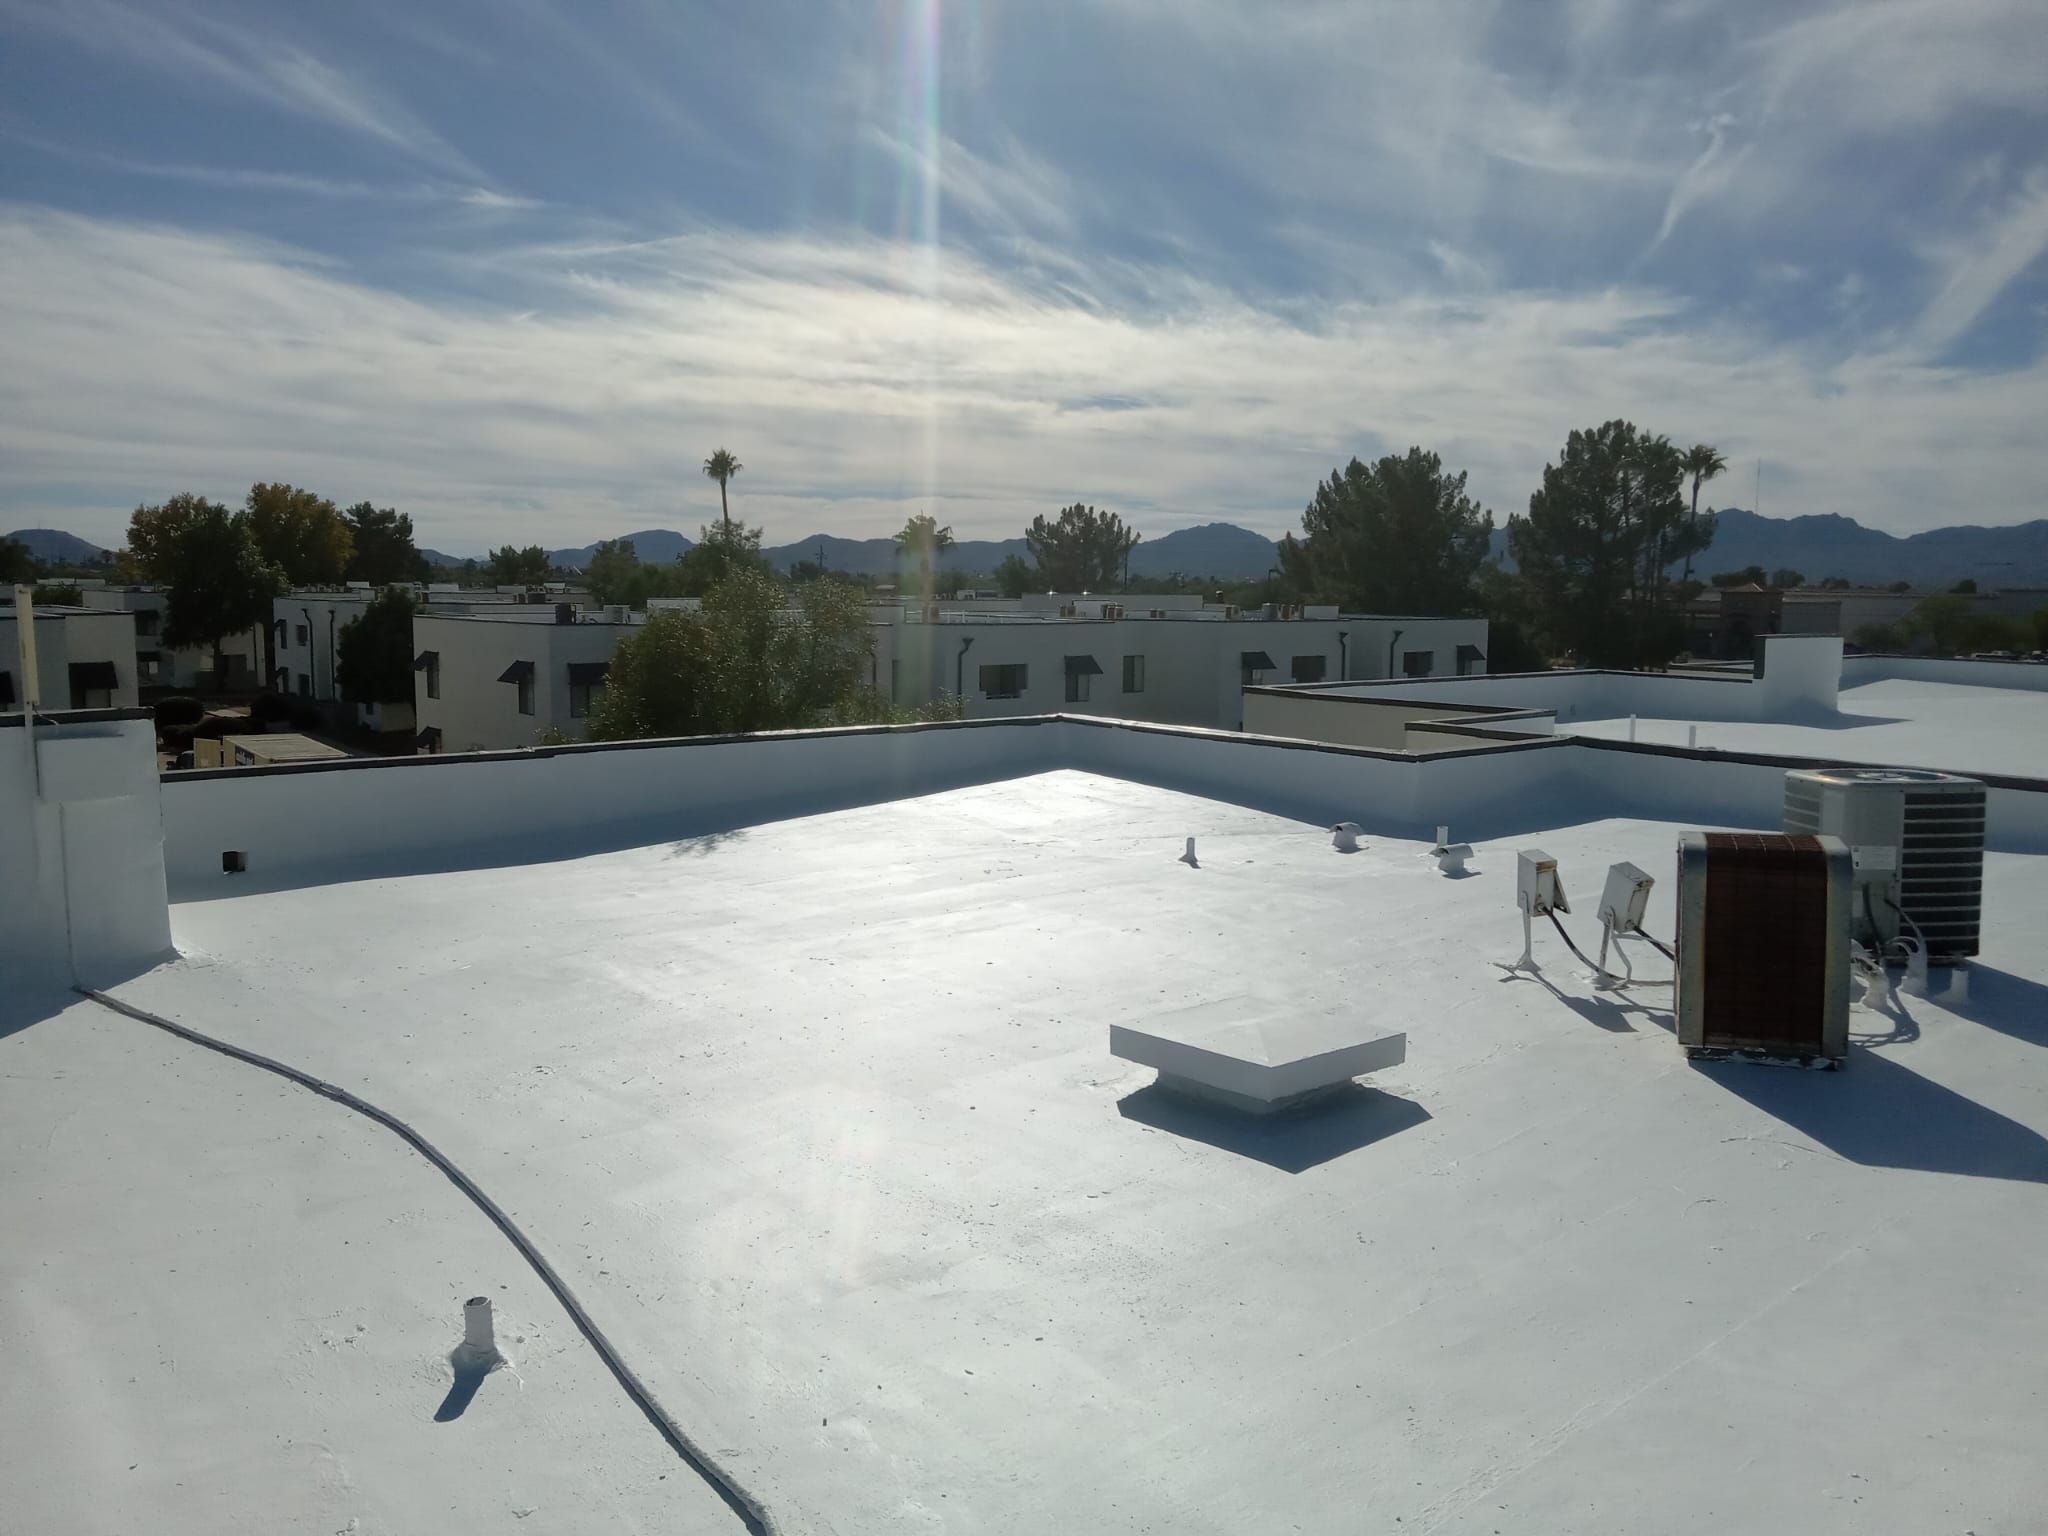 Reflective coating on a spray foam roof in Peoria to improve energy efficiency.